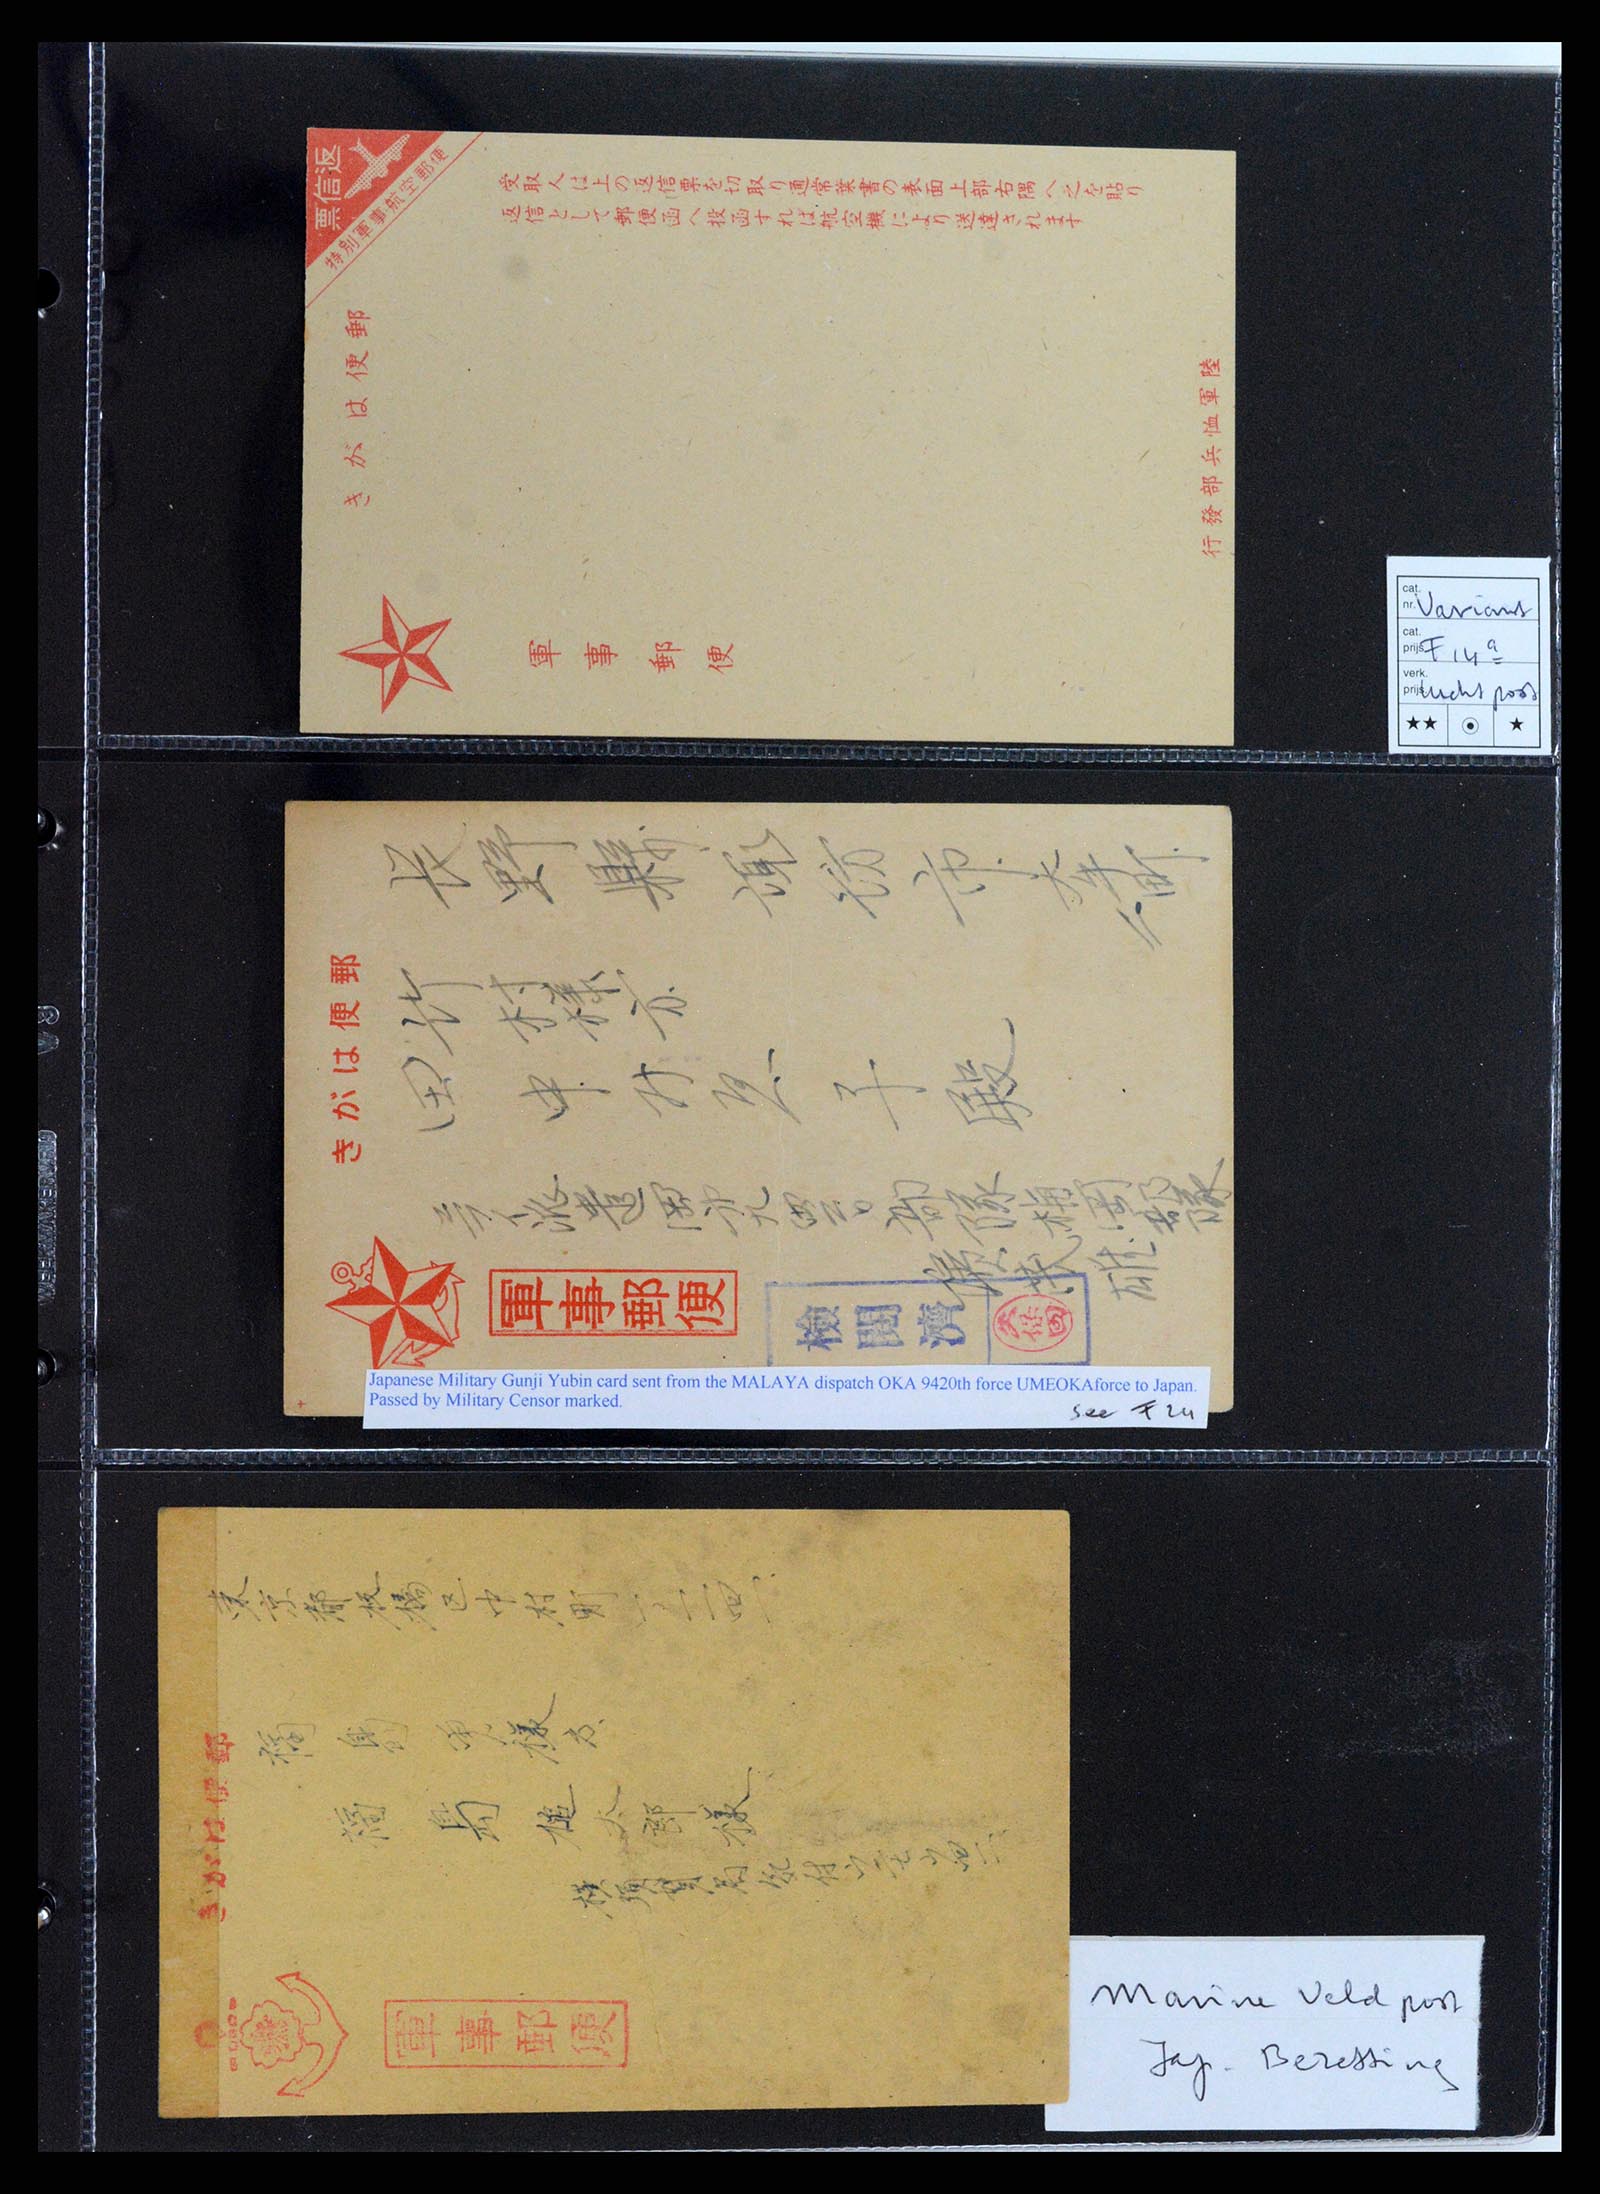 37423 024 - Stamp collection 37423 Dutch Indies Japanese occupation covers 1942-1945